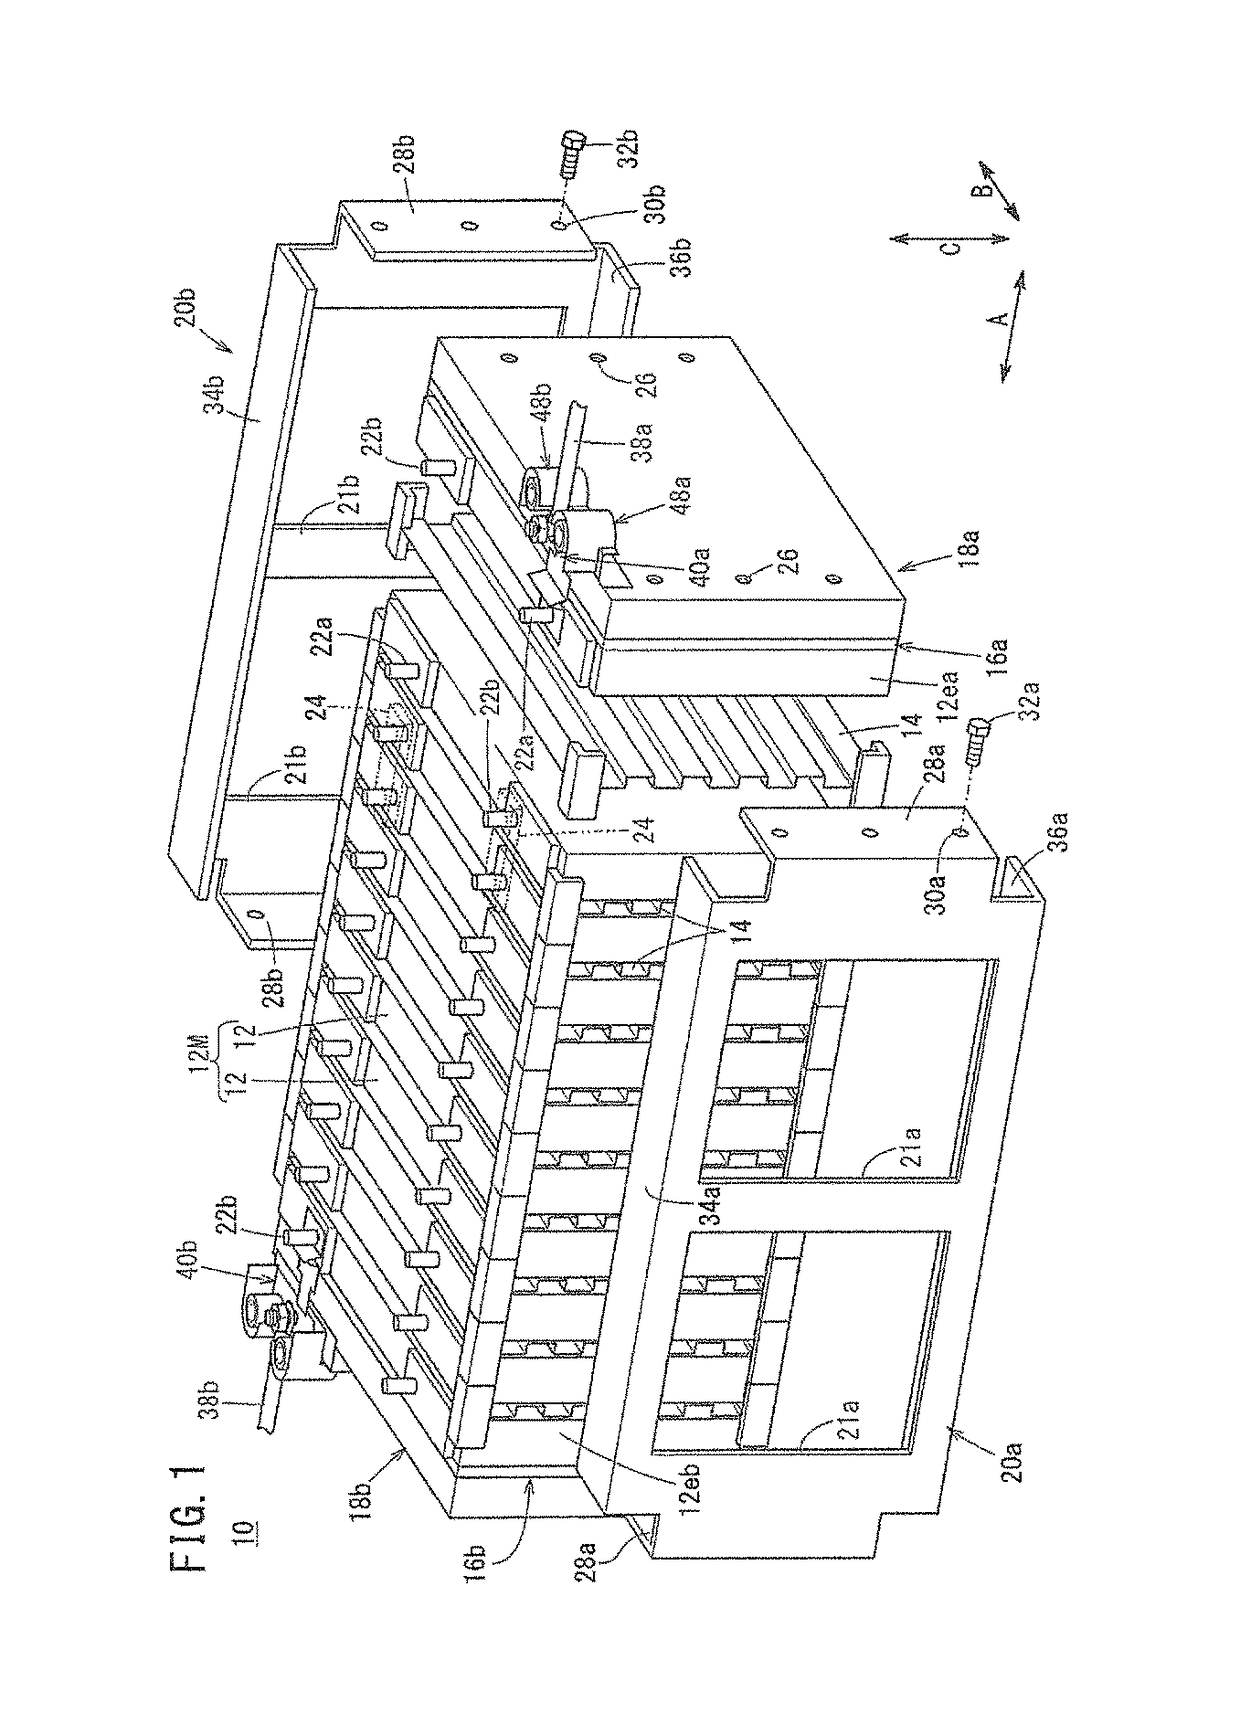 Energy storage module with reduced damage to electrode terminals